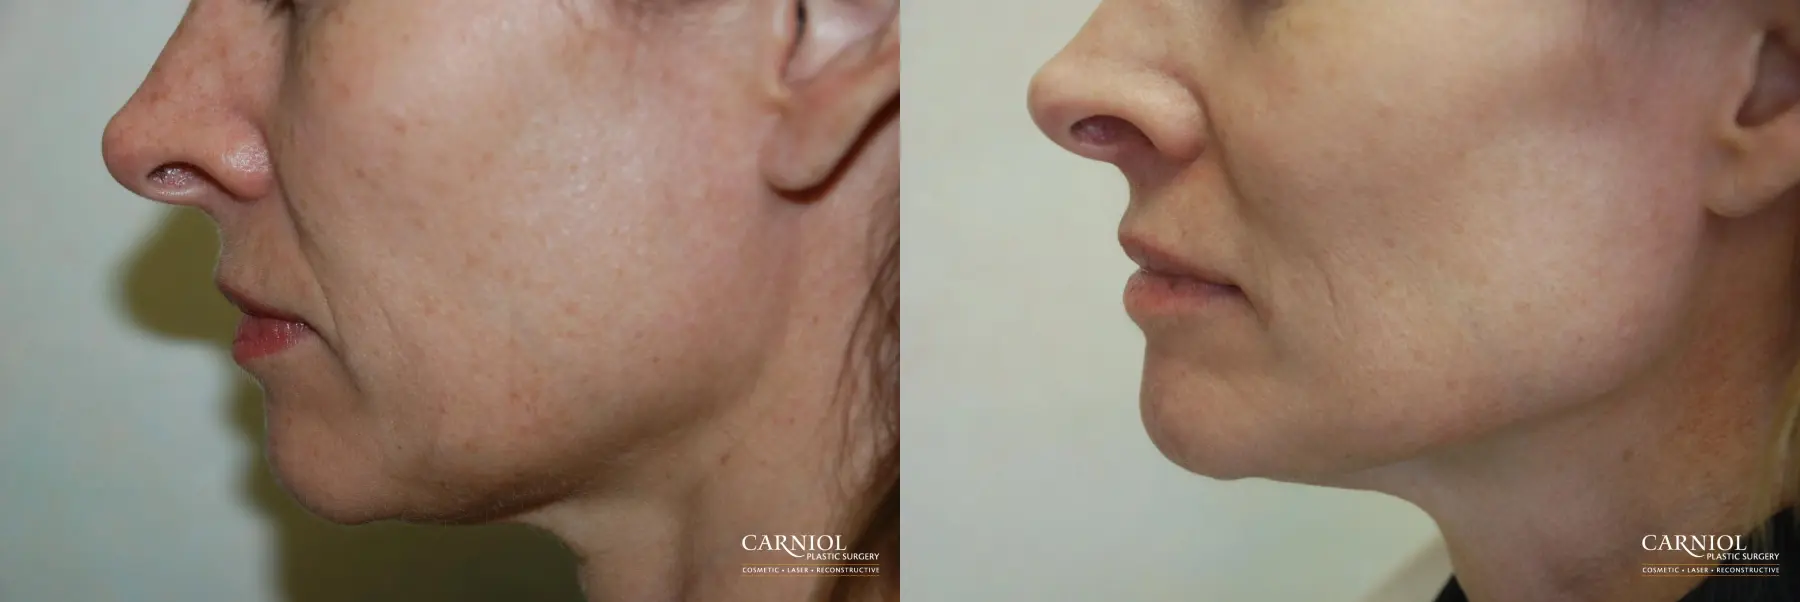 Fractional Resurfacing: Patient 1 - Before and After  